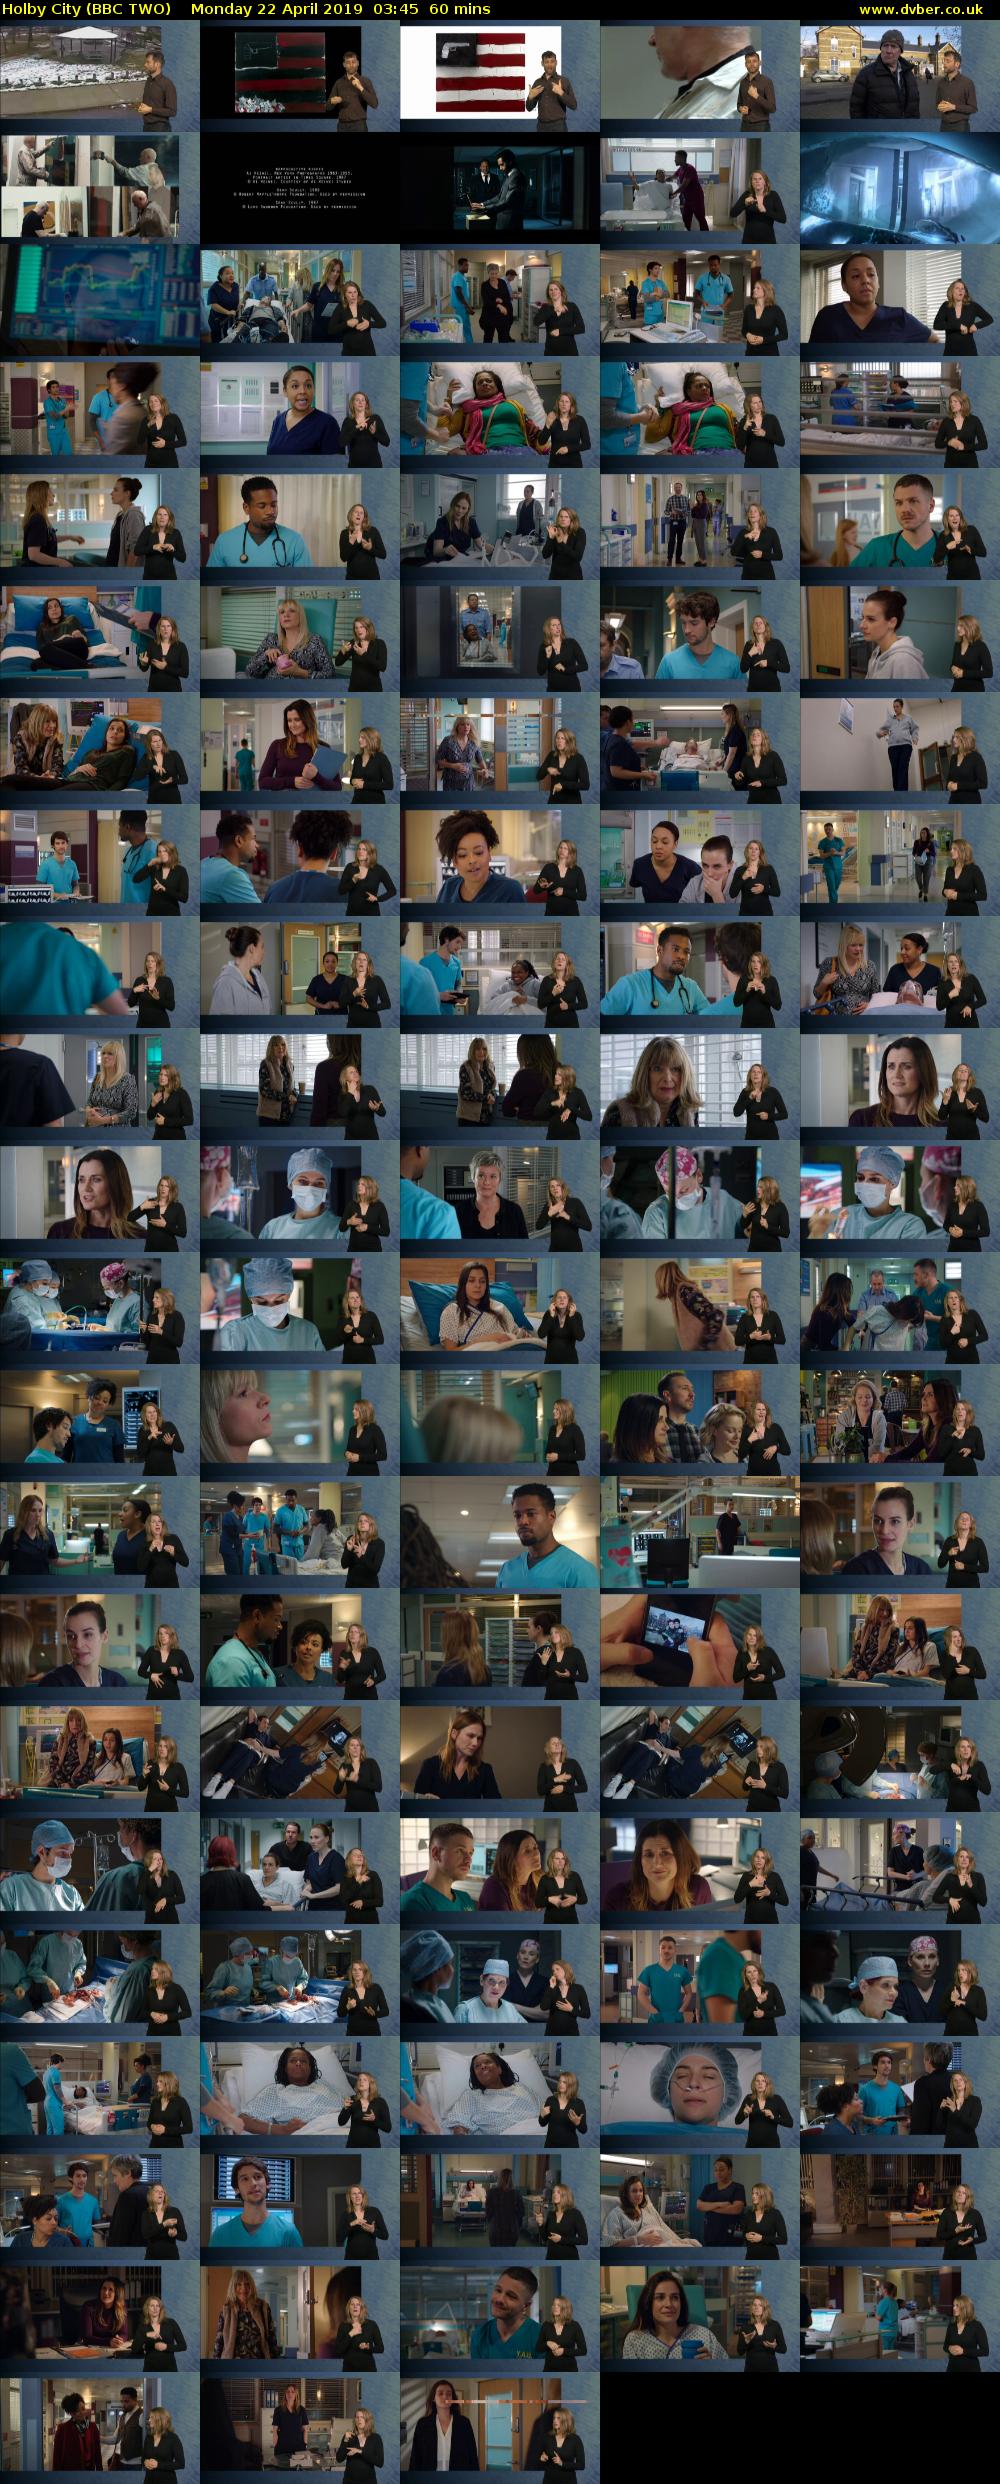 Holby City (BBC TWO) Monday 22 April 2019 03:45 - 04:45